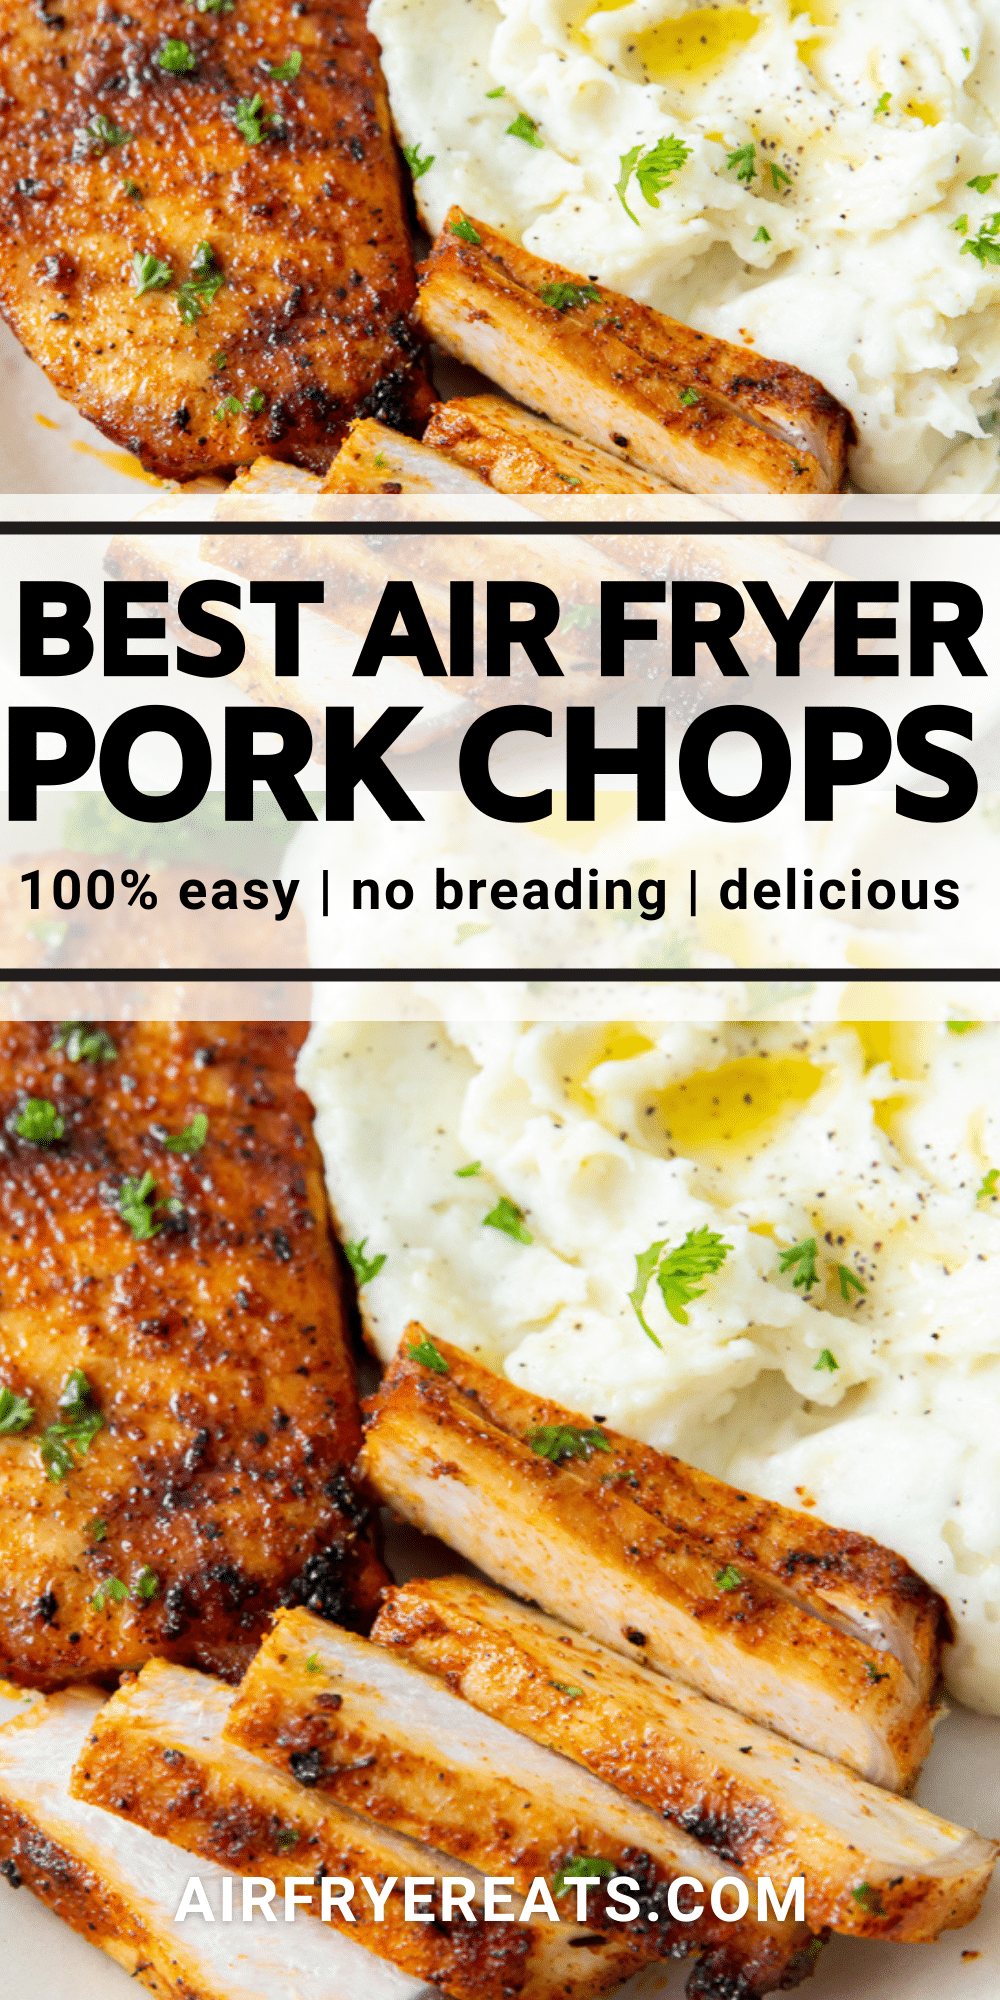 Air Fryer Pork chops - no breading needed to enjoy juicy, delicious pork chops in the air fryer! A simple seasoning blend gives these air fryer pork chops great flavor, and they're ready in less than 10 minutes. #porkchops @airfryerpork via @vegetarianmamma